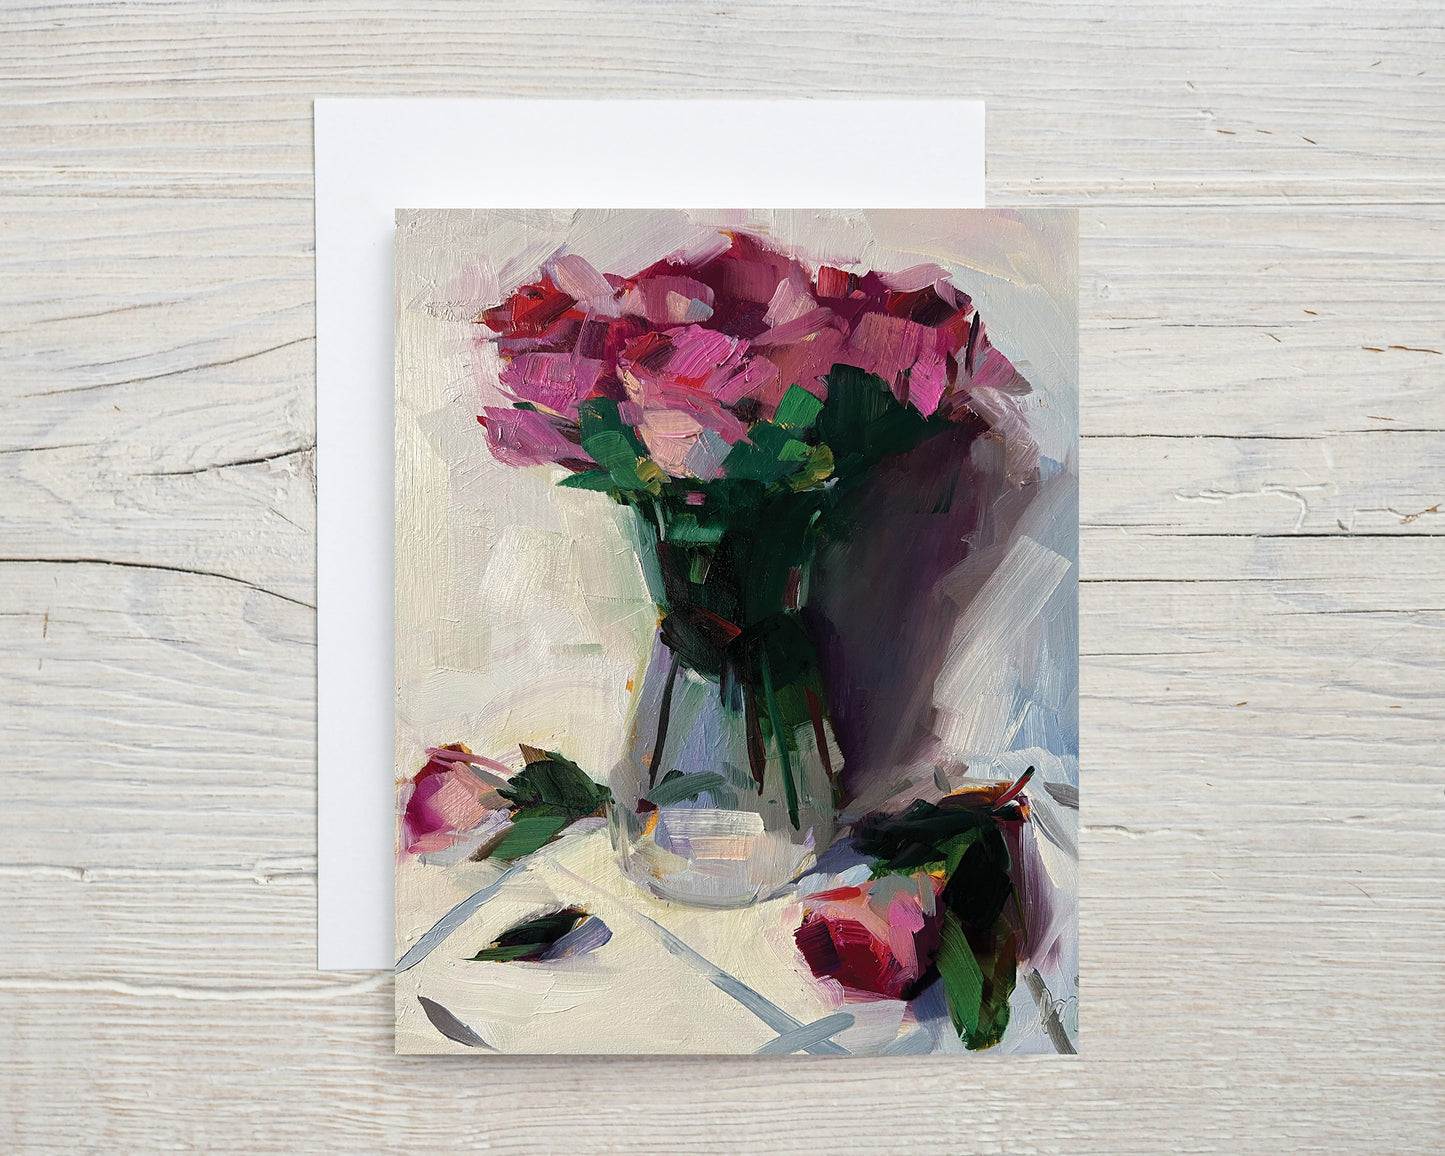 NEW Pink Rose Bouquet, Set of 8 notecards and envelopes